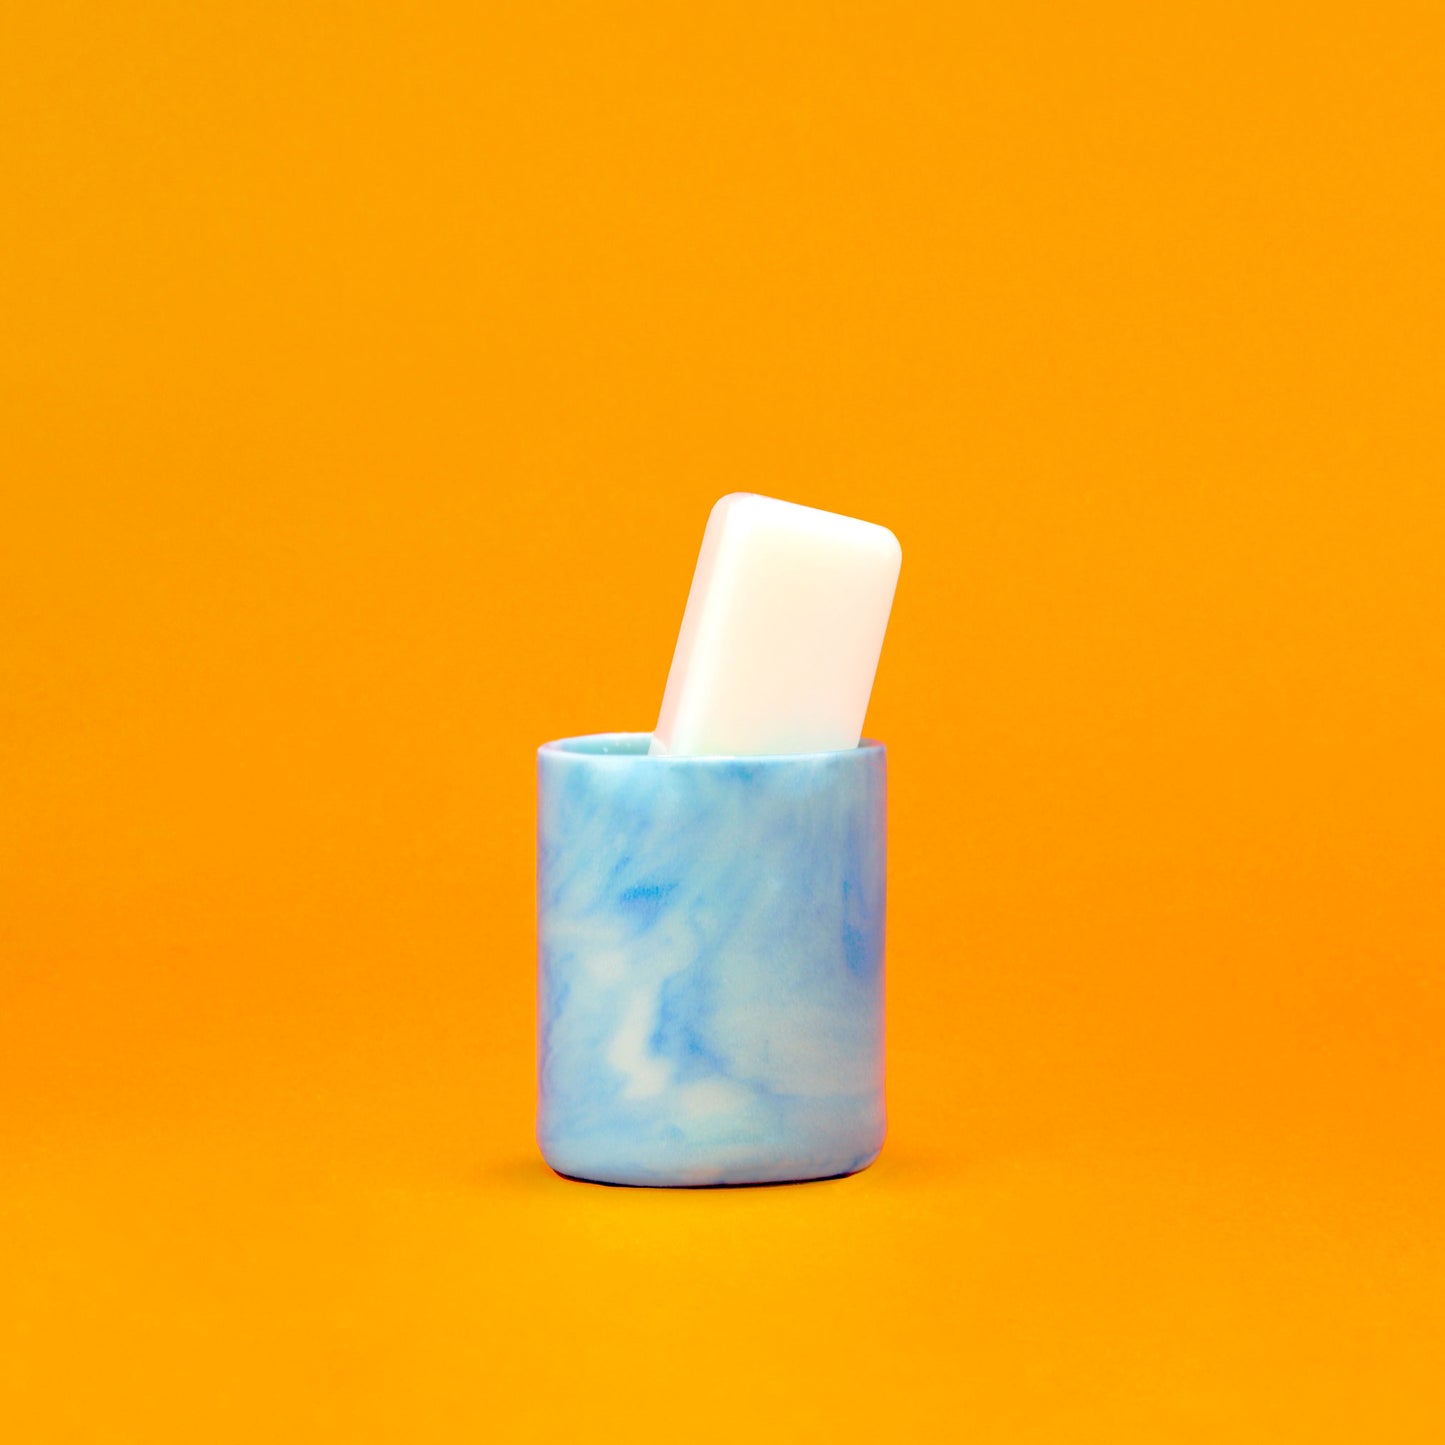 A stain removing soap stick sits at an angle in a small marble patterned ceramic holder